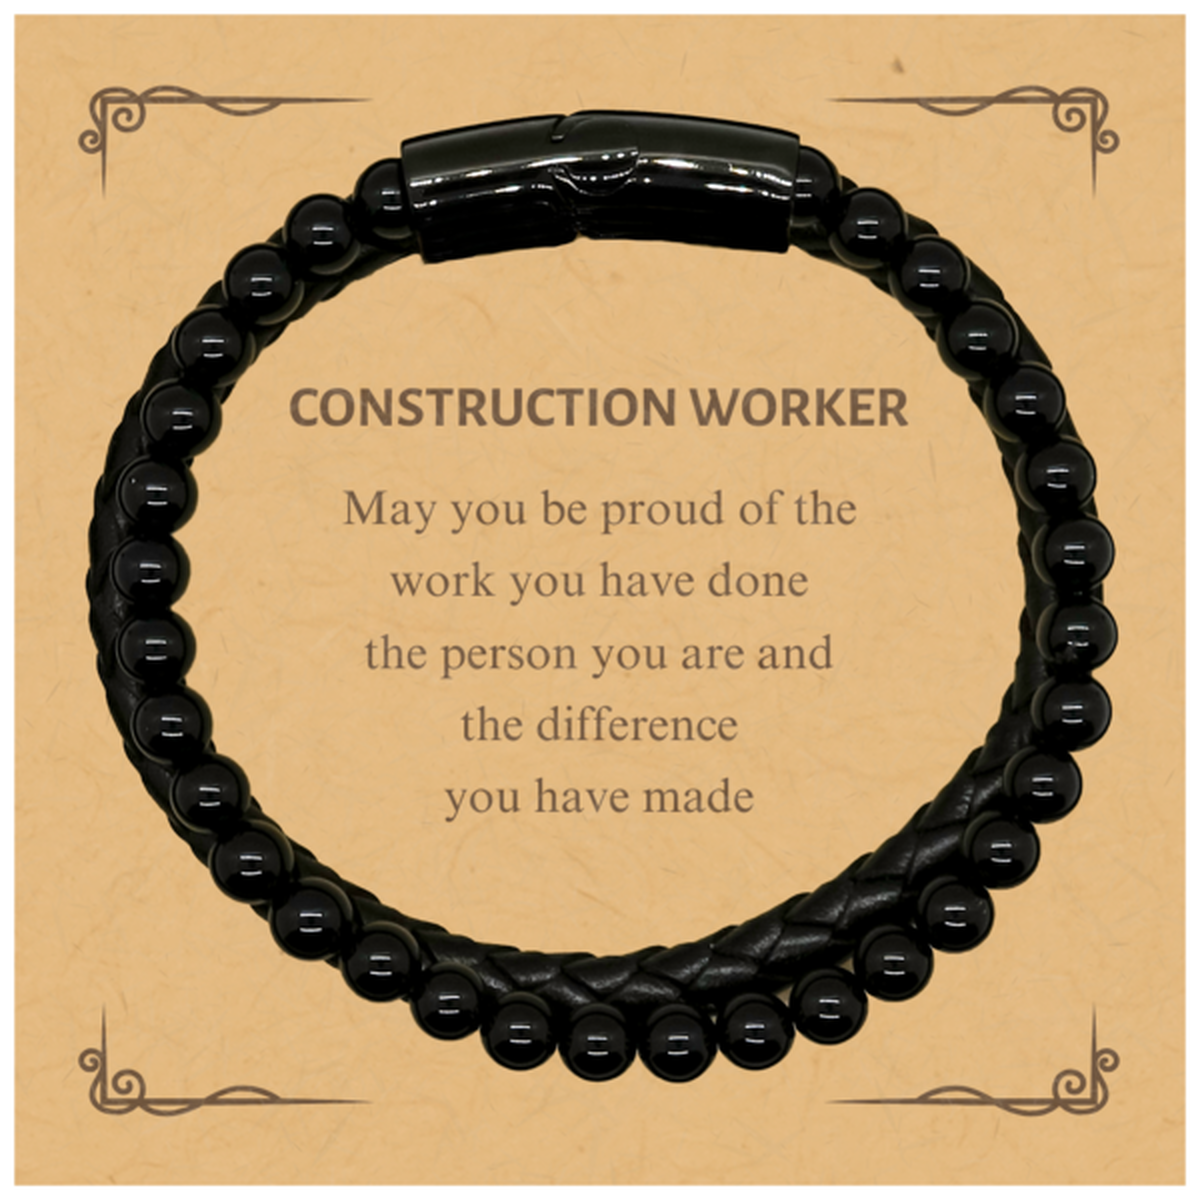 Construction Worker May you be proud of the work you have done, Retirement Construction Worker Stone Leather Bracelets for Colleague Appreciation Gifts Amazing for Construction Worker